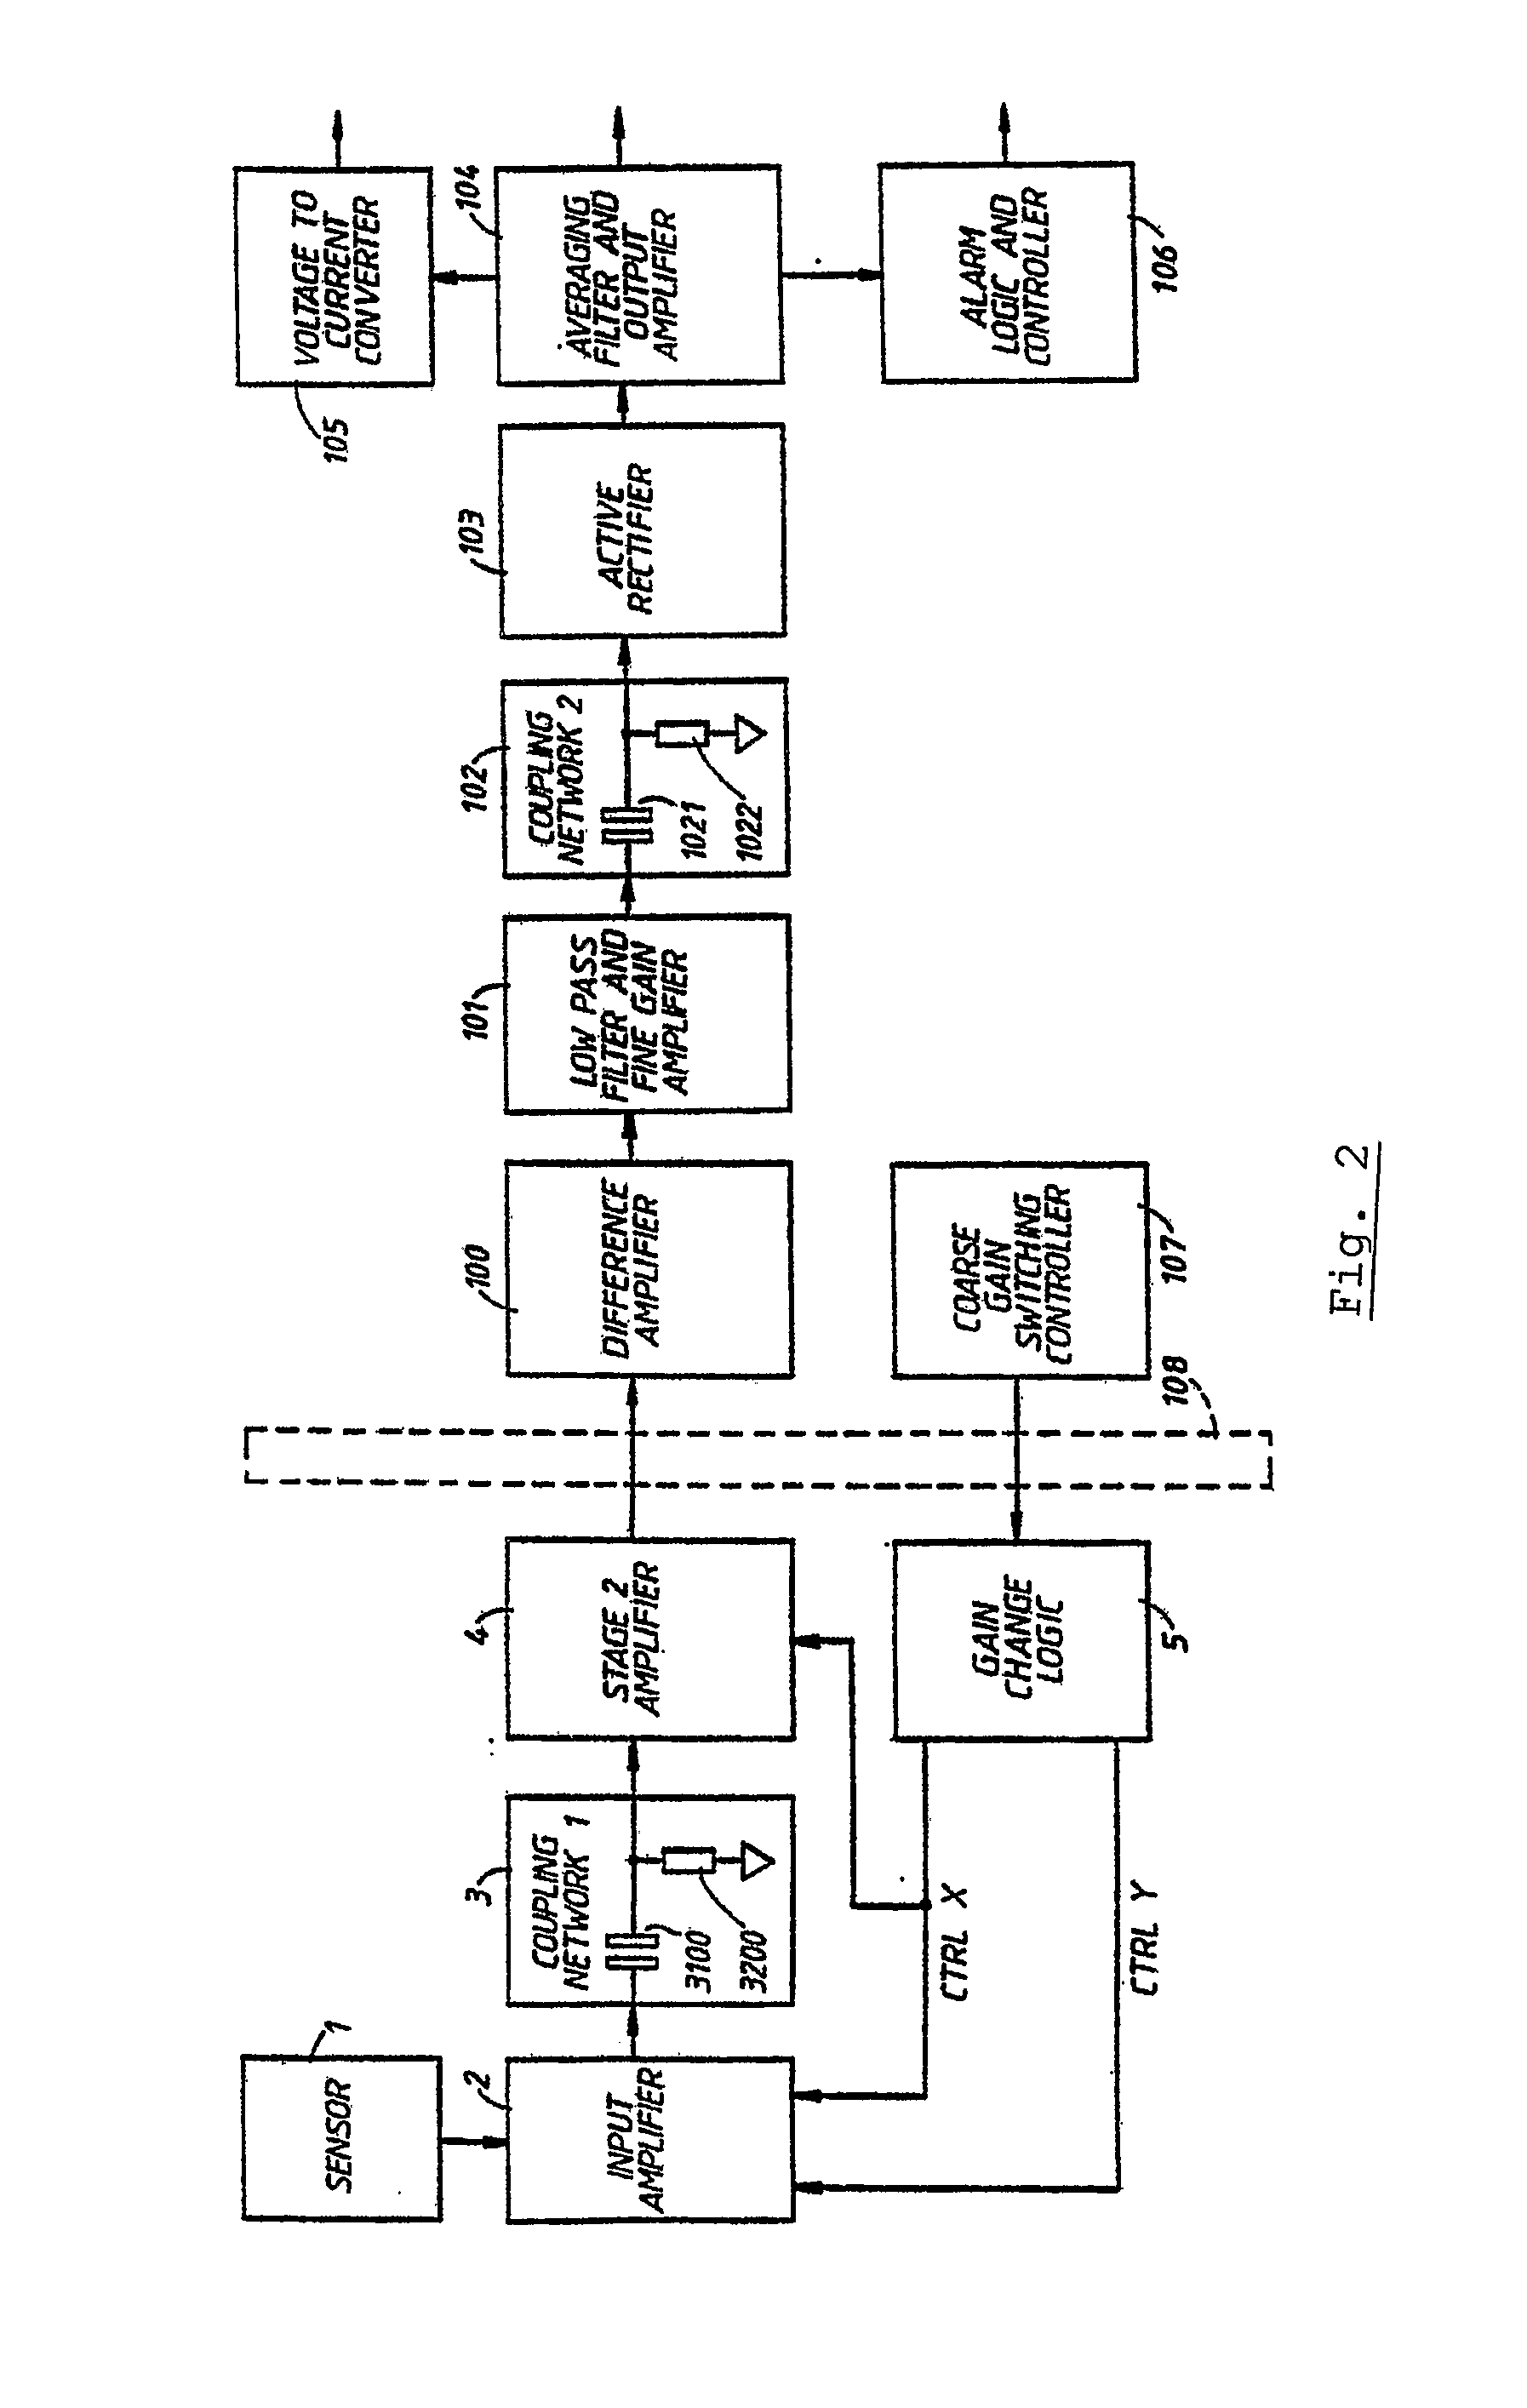 Methods and apparatus for monitoring particles flowing in a stack